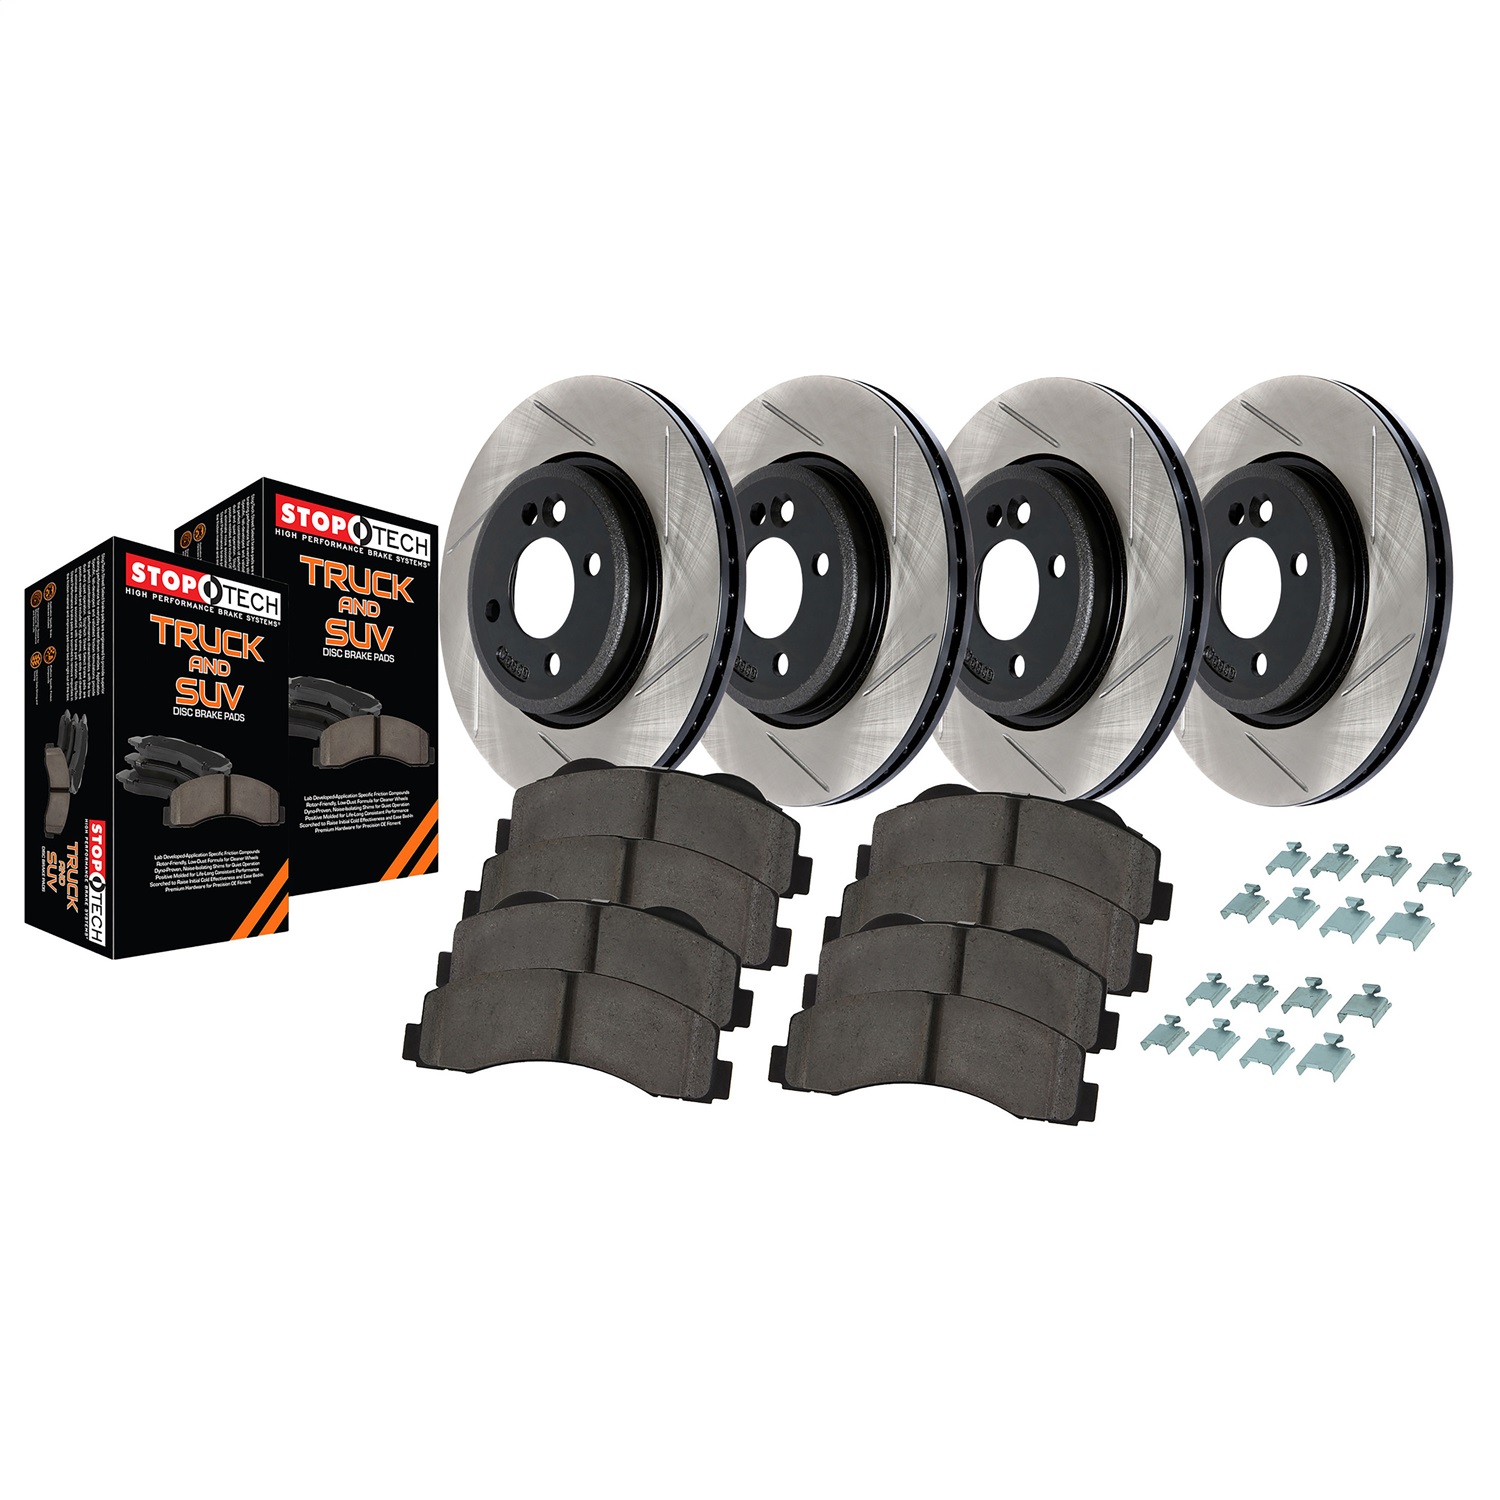 StopTech 967.44073 Truck Performance - 4 Wheel Disc Brake Kit w/Slotted Rotor